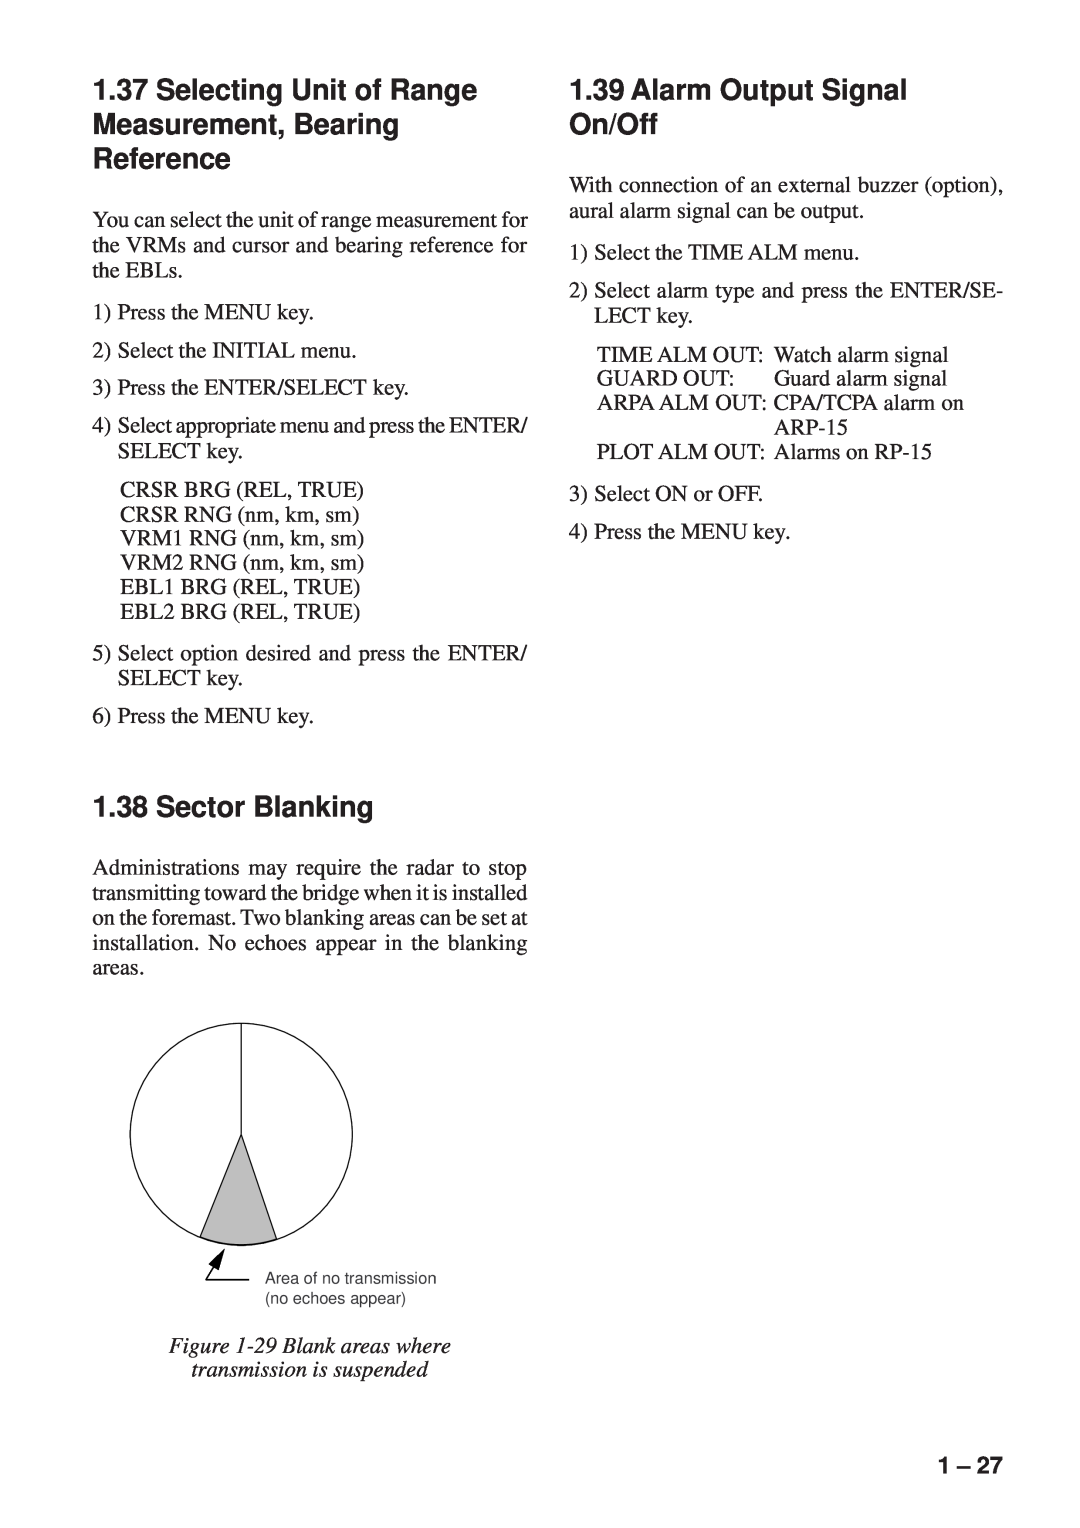 Furuno FR-8111 manual Selecting Unit of Range Measurement, Bearing Reference, Sector Blanking, Alarm Output Signal On/Off 